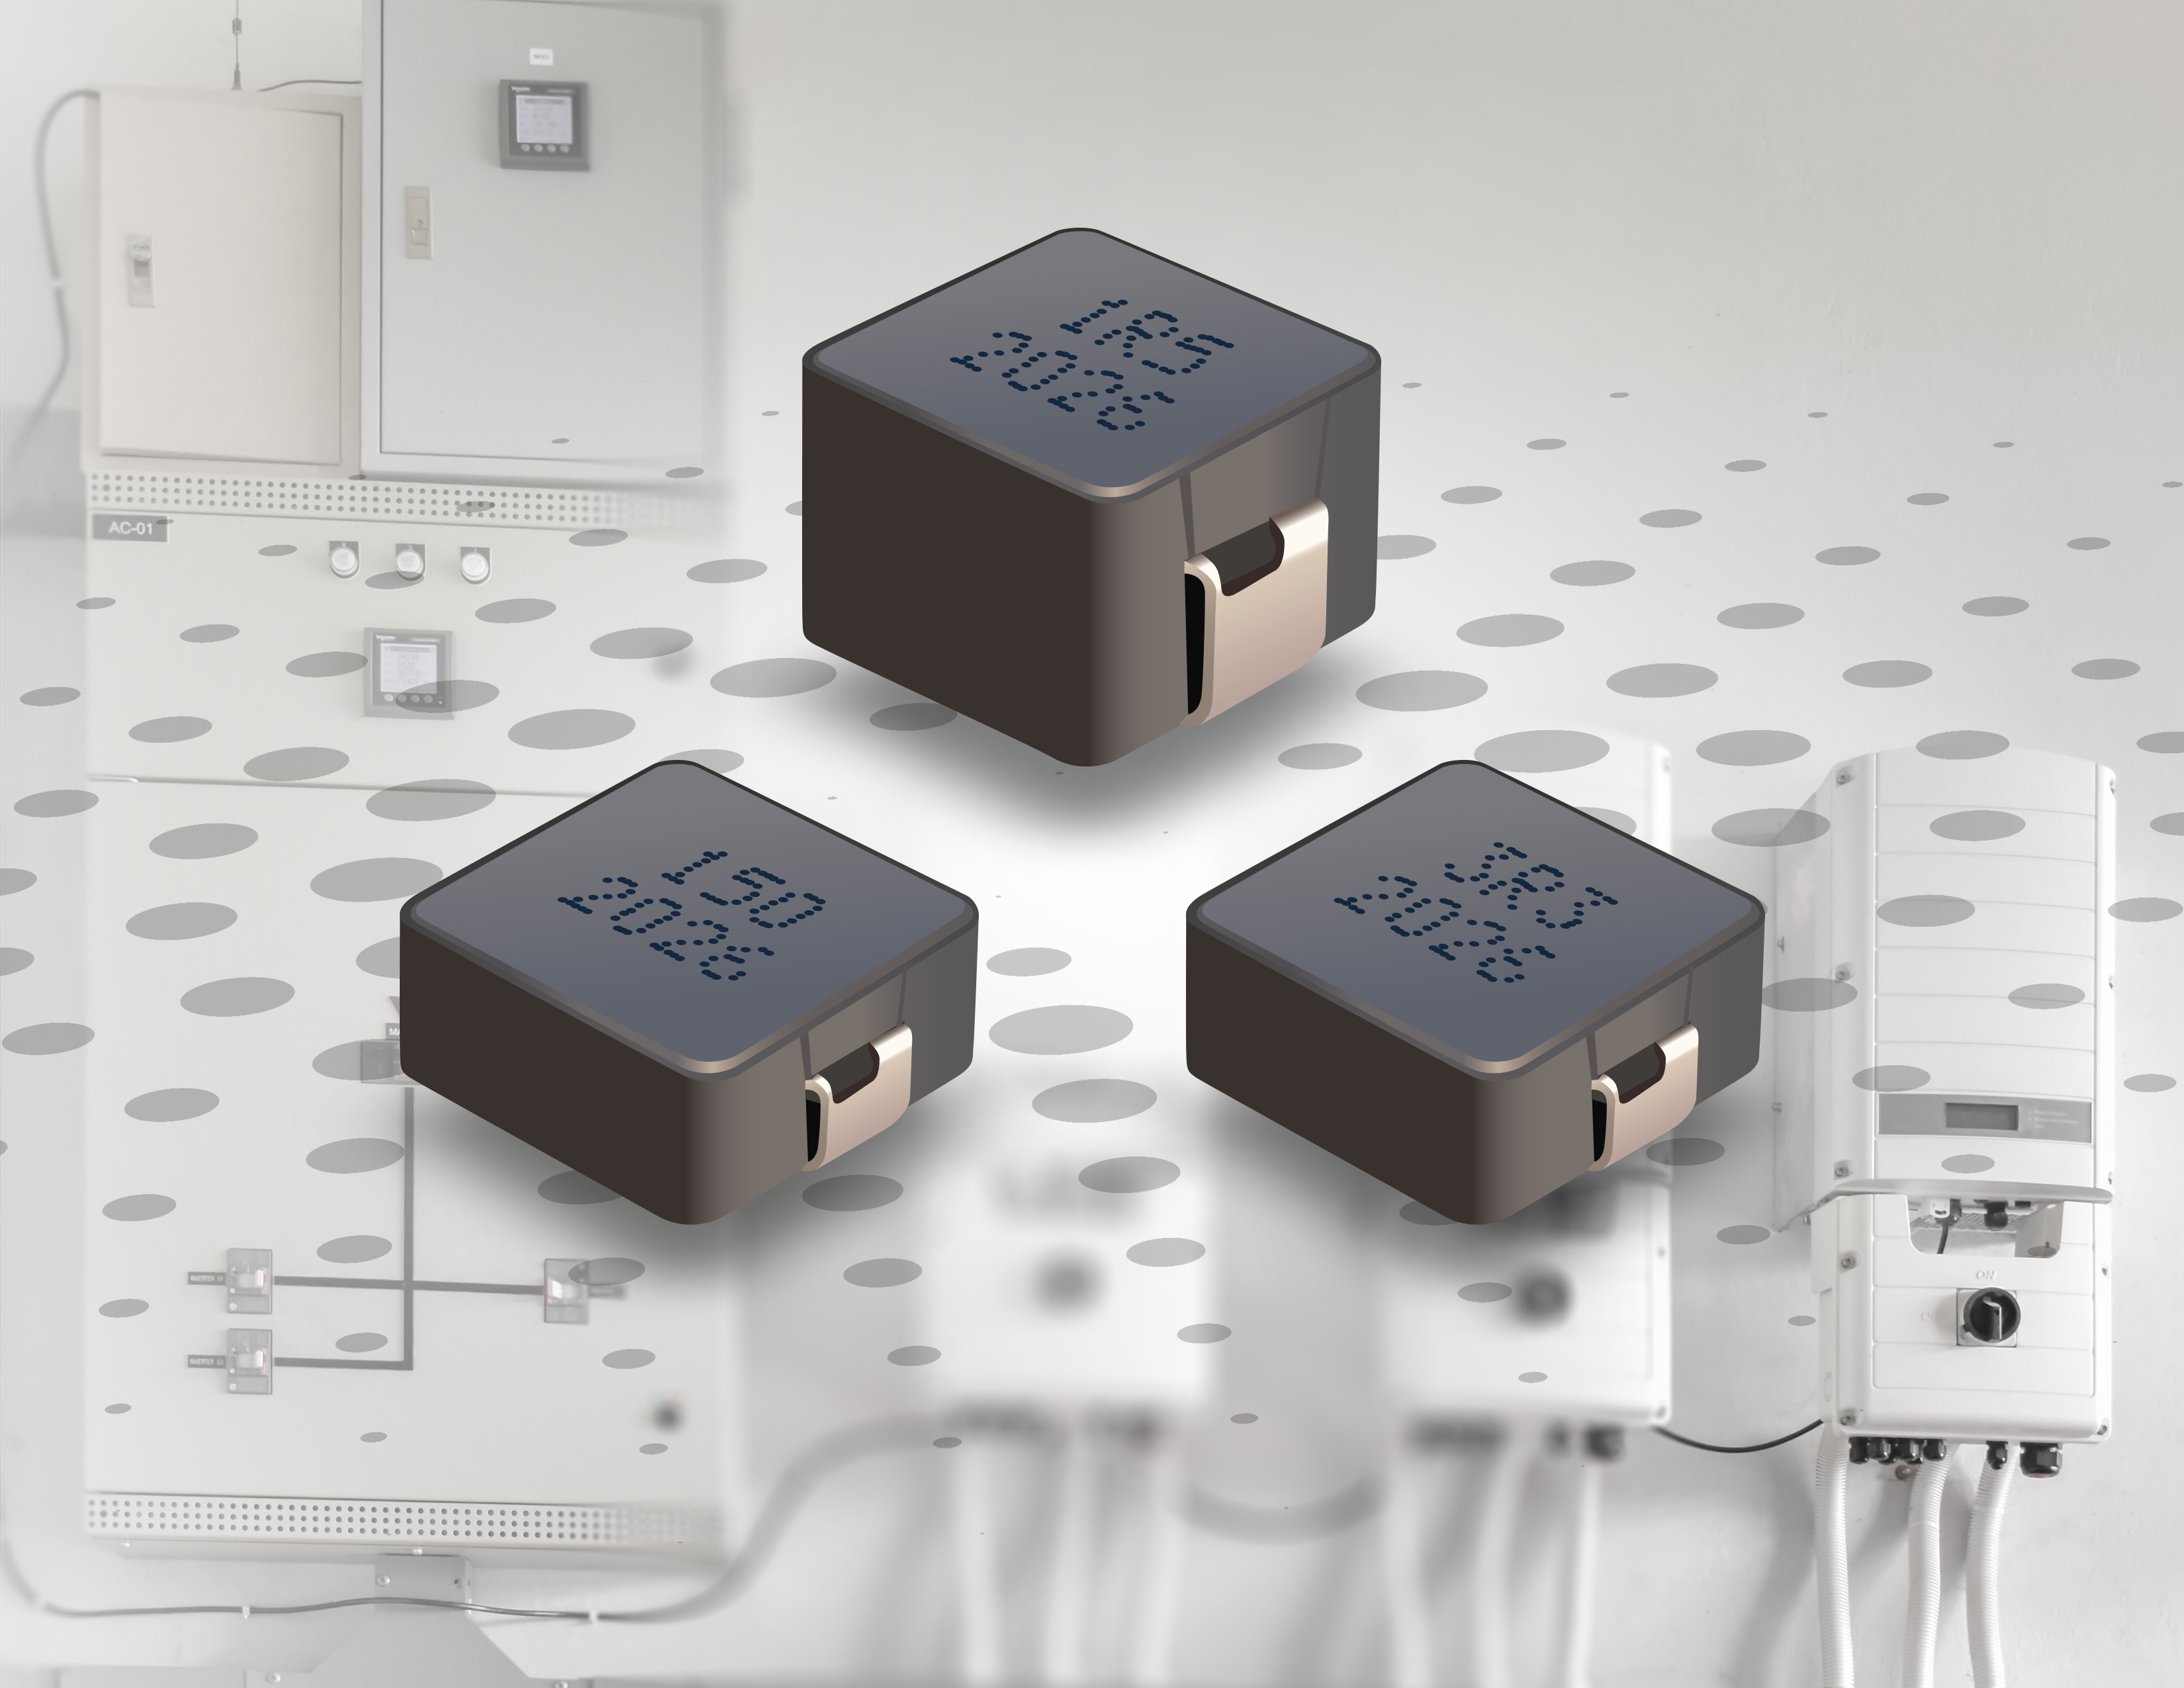 Three Automotive-Grade Series of Shielded Power Inductors